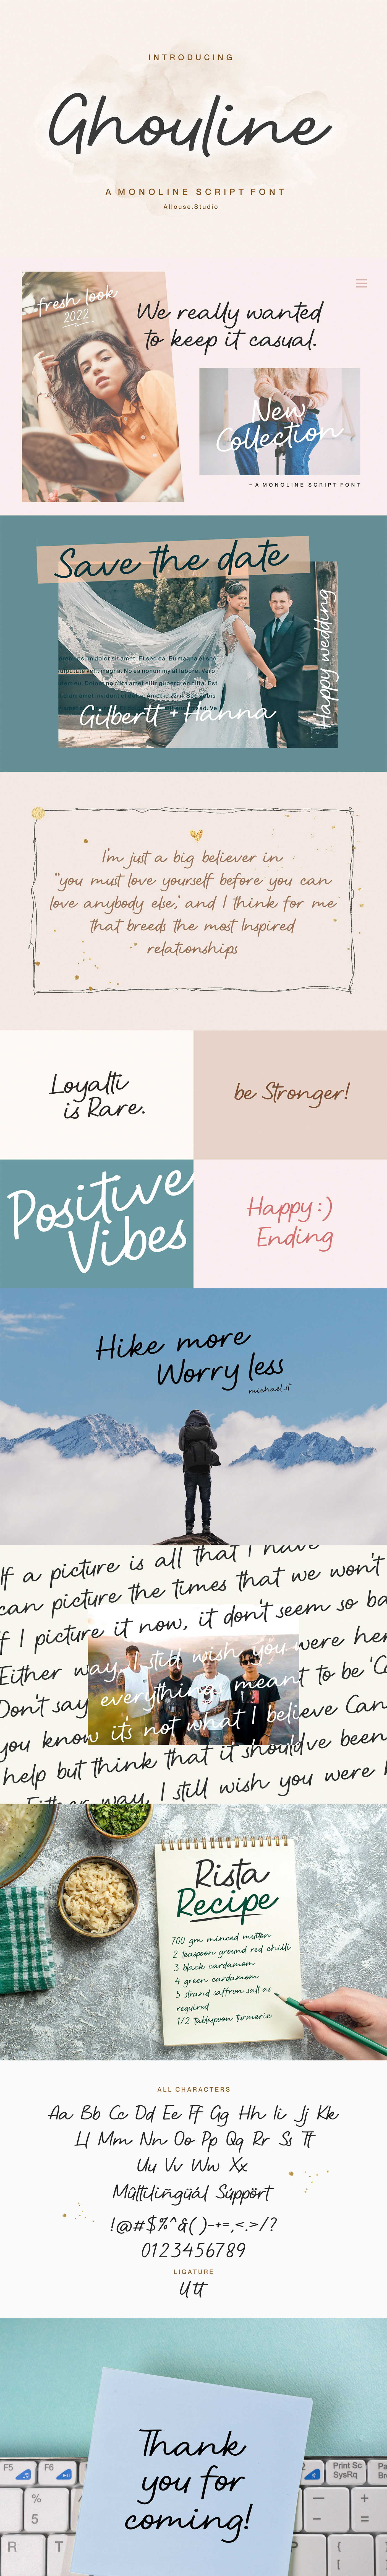 It  is a delicate, beautiful and professional font, get inspired by its playful romantic charm.